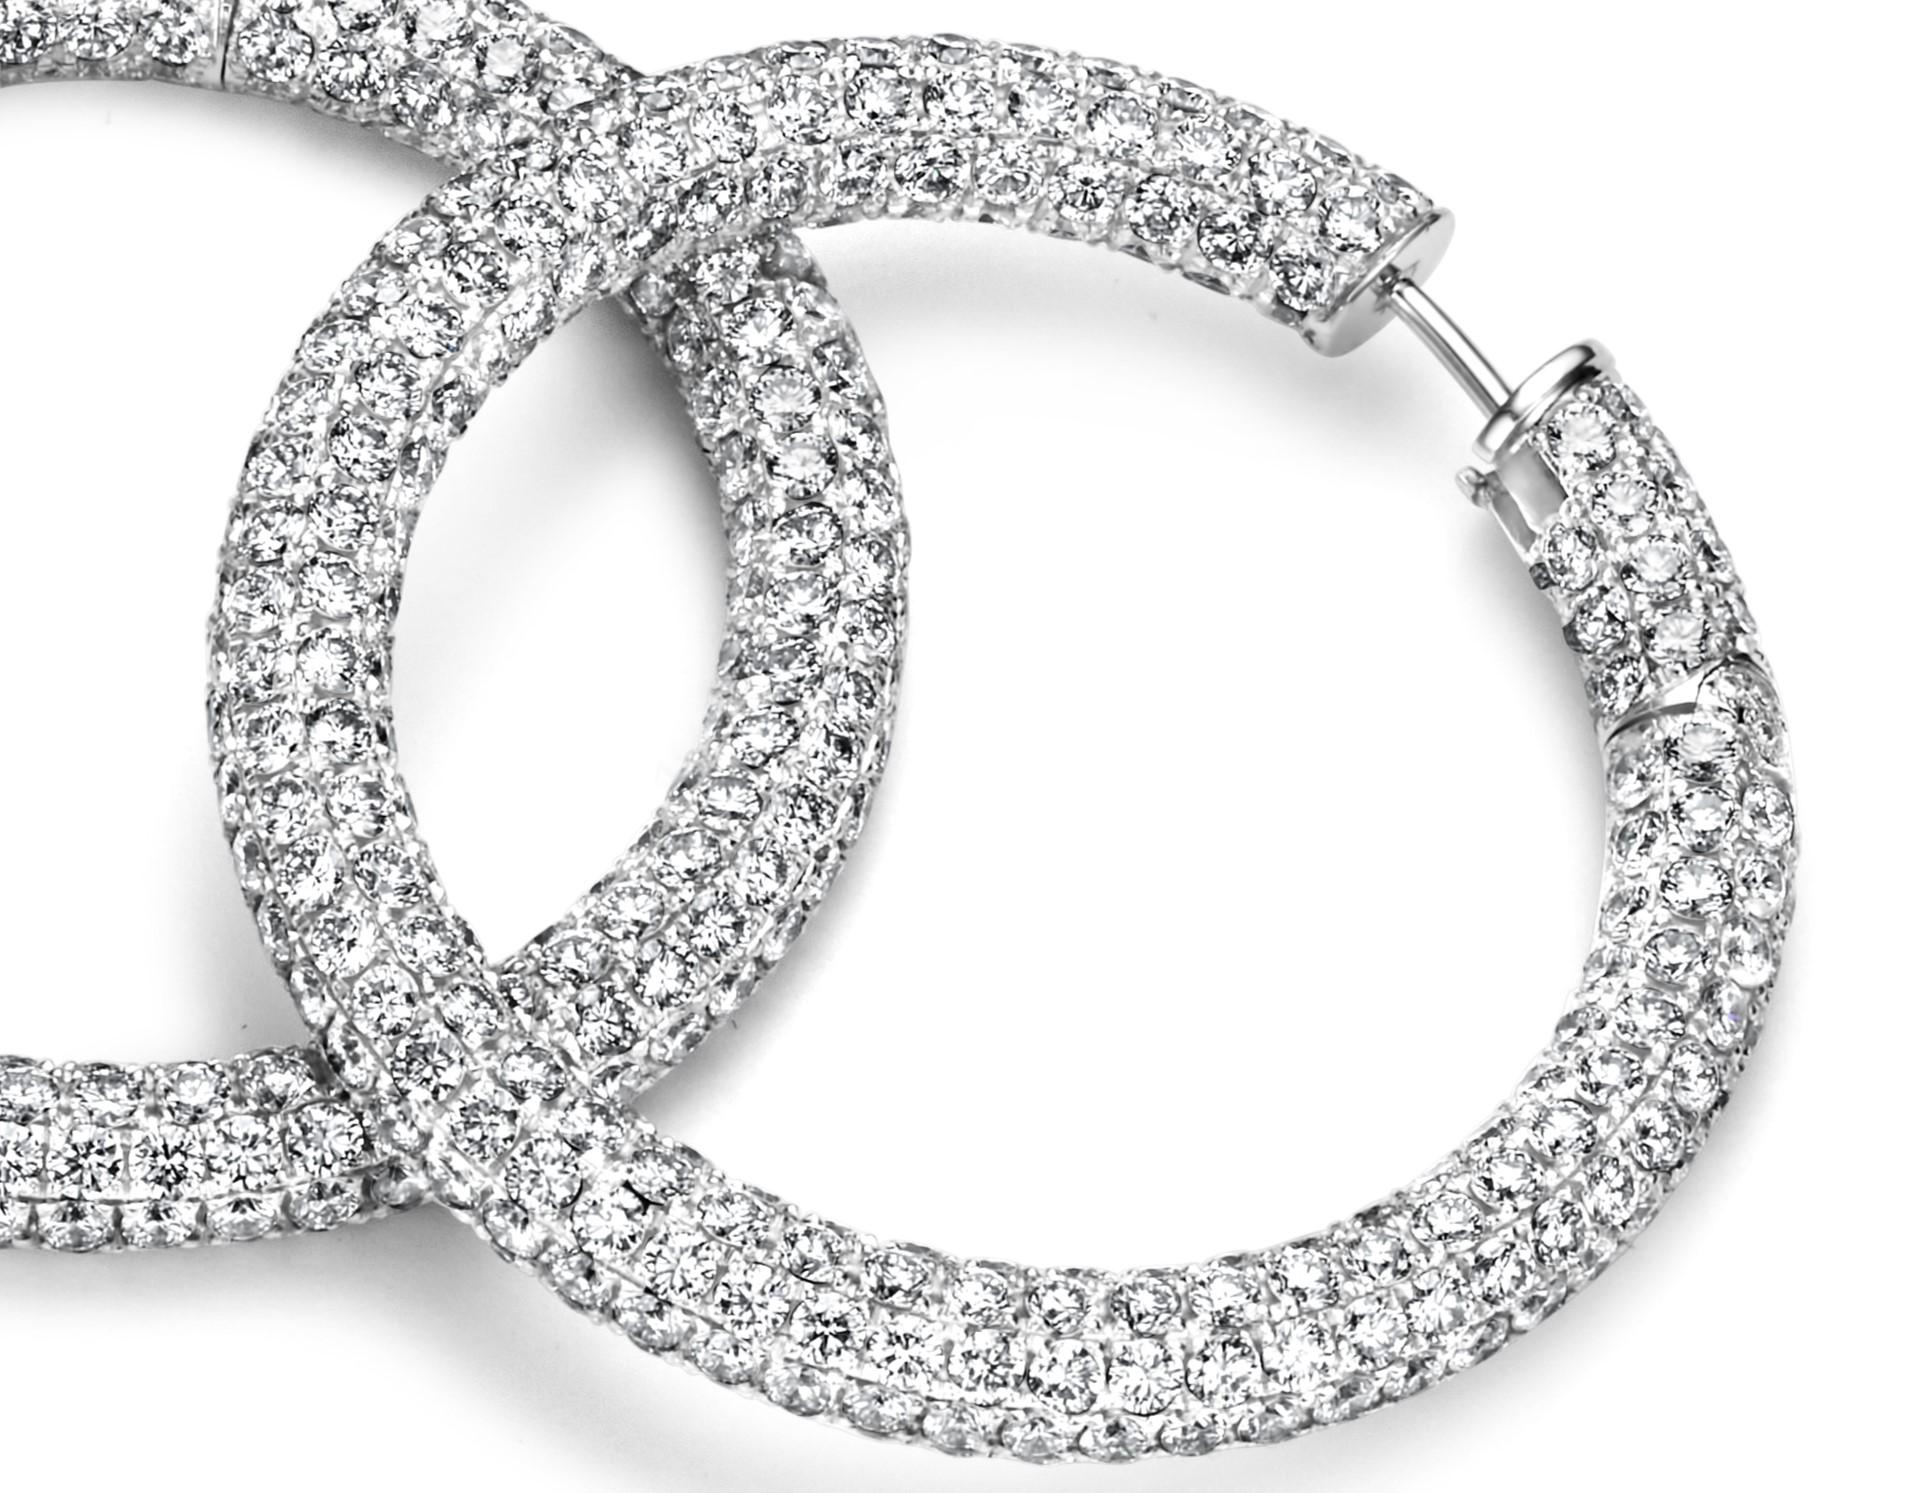 Brilliant Cut Magnificent 18 Karat White Gold Hoop Earrings with 22.6 Carat Diamonds For Sale